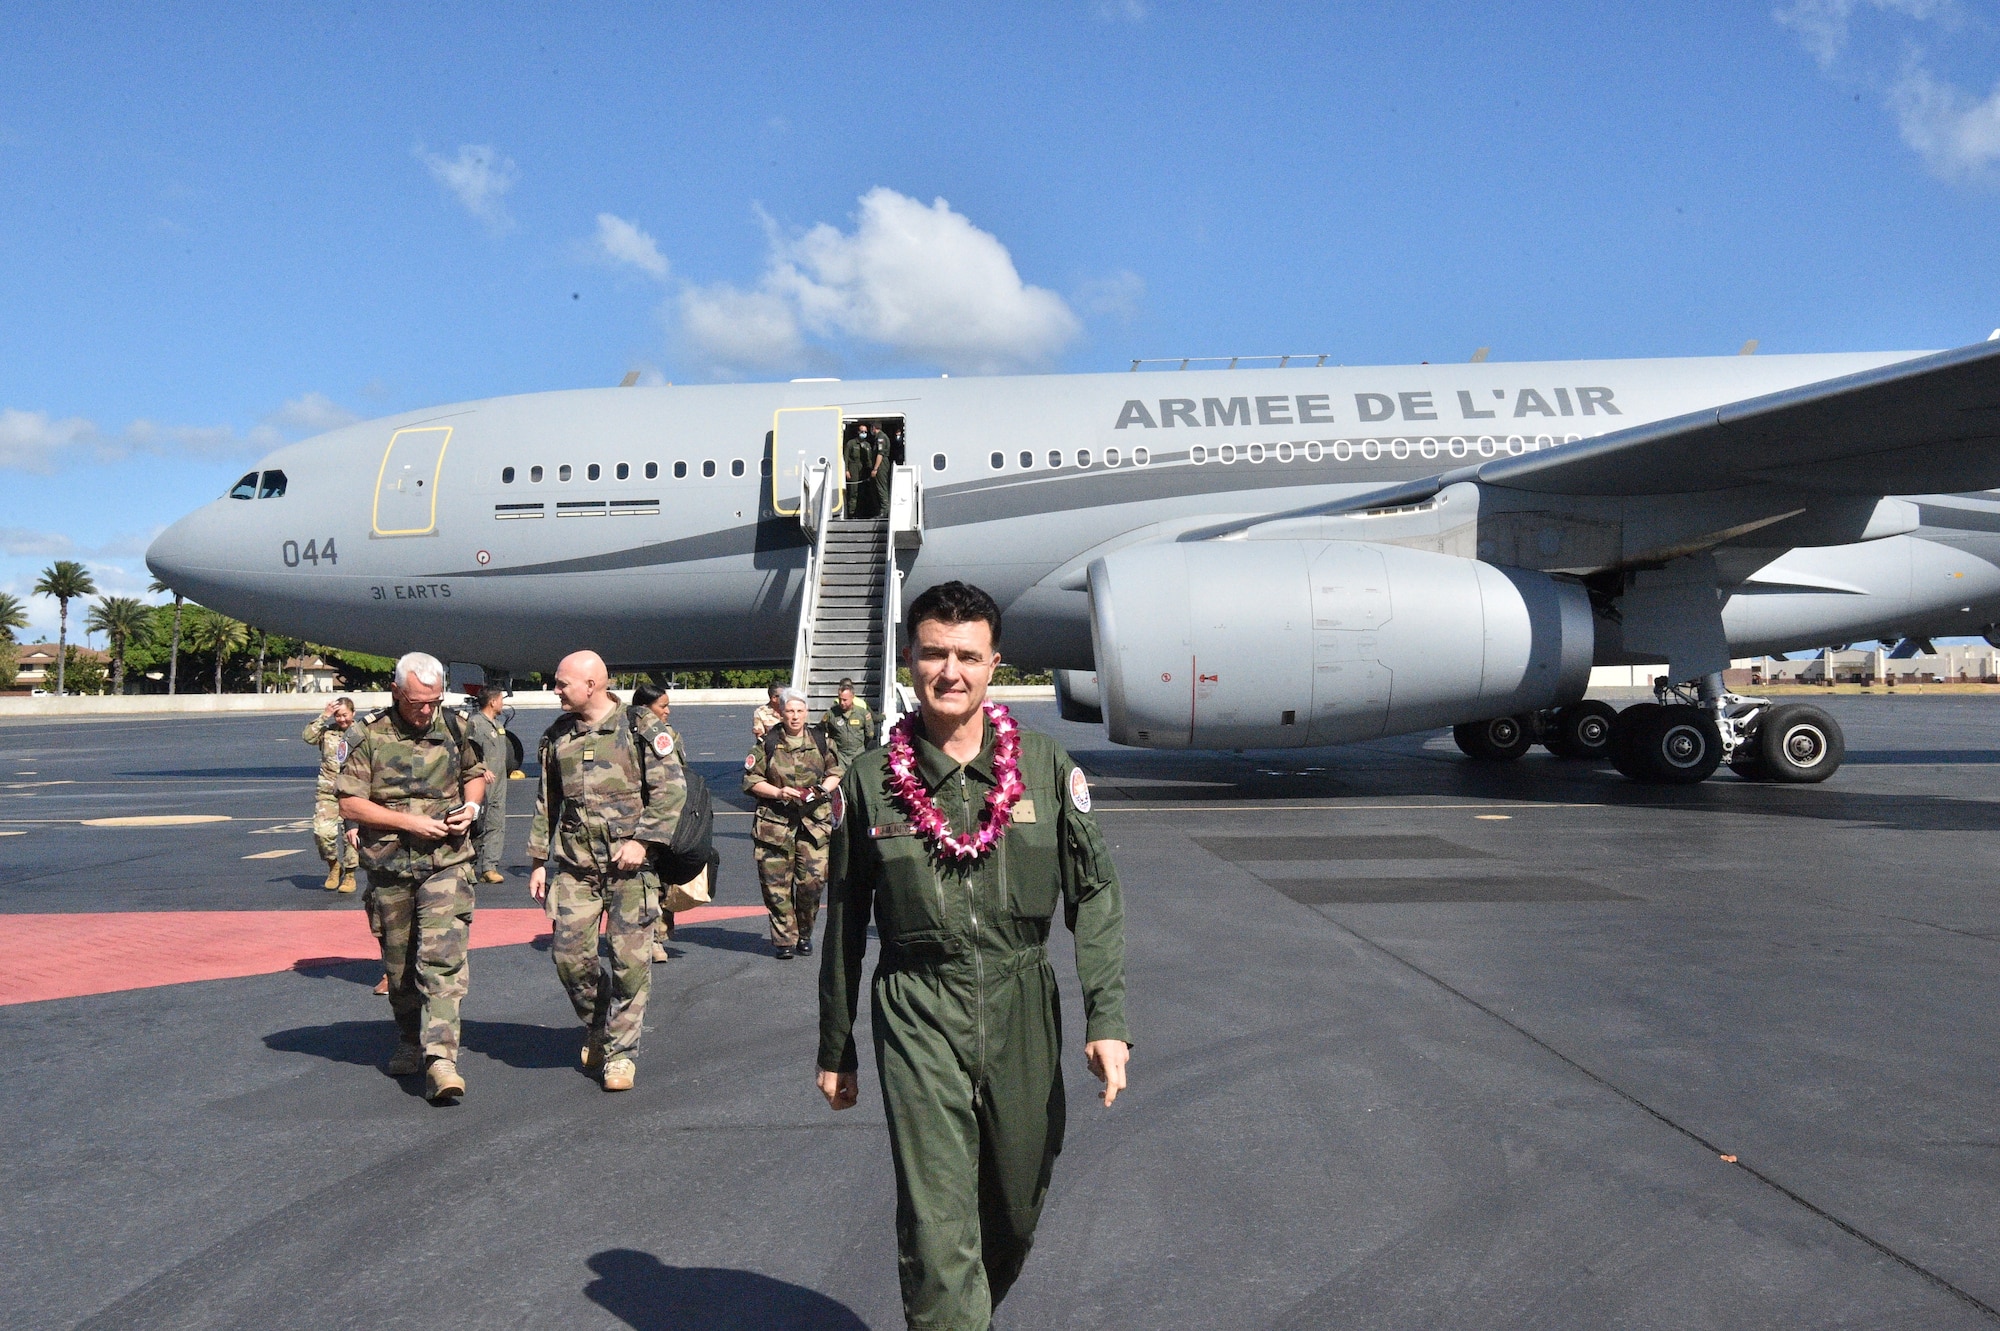 Members from the French Air and Space Force land in Hawaii as part of Exercise WAKEA, a joint U.S. and French training mission at Joint Base Pearl Harbor-Hickam, Hawaii, June 27, 2021. French airmen flew and trained alongside their U.S. counterparts to better understand each nation’s capabilities and how to work together in the future. (U.S. Air Force photo by 1st Lt. Benjamin Aronson)